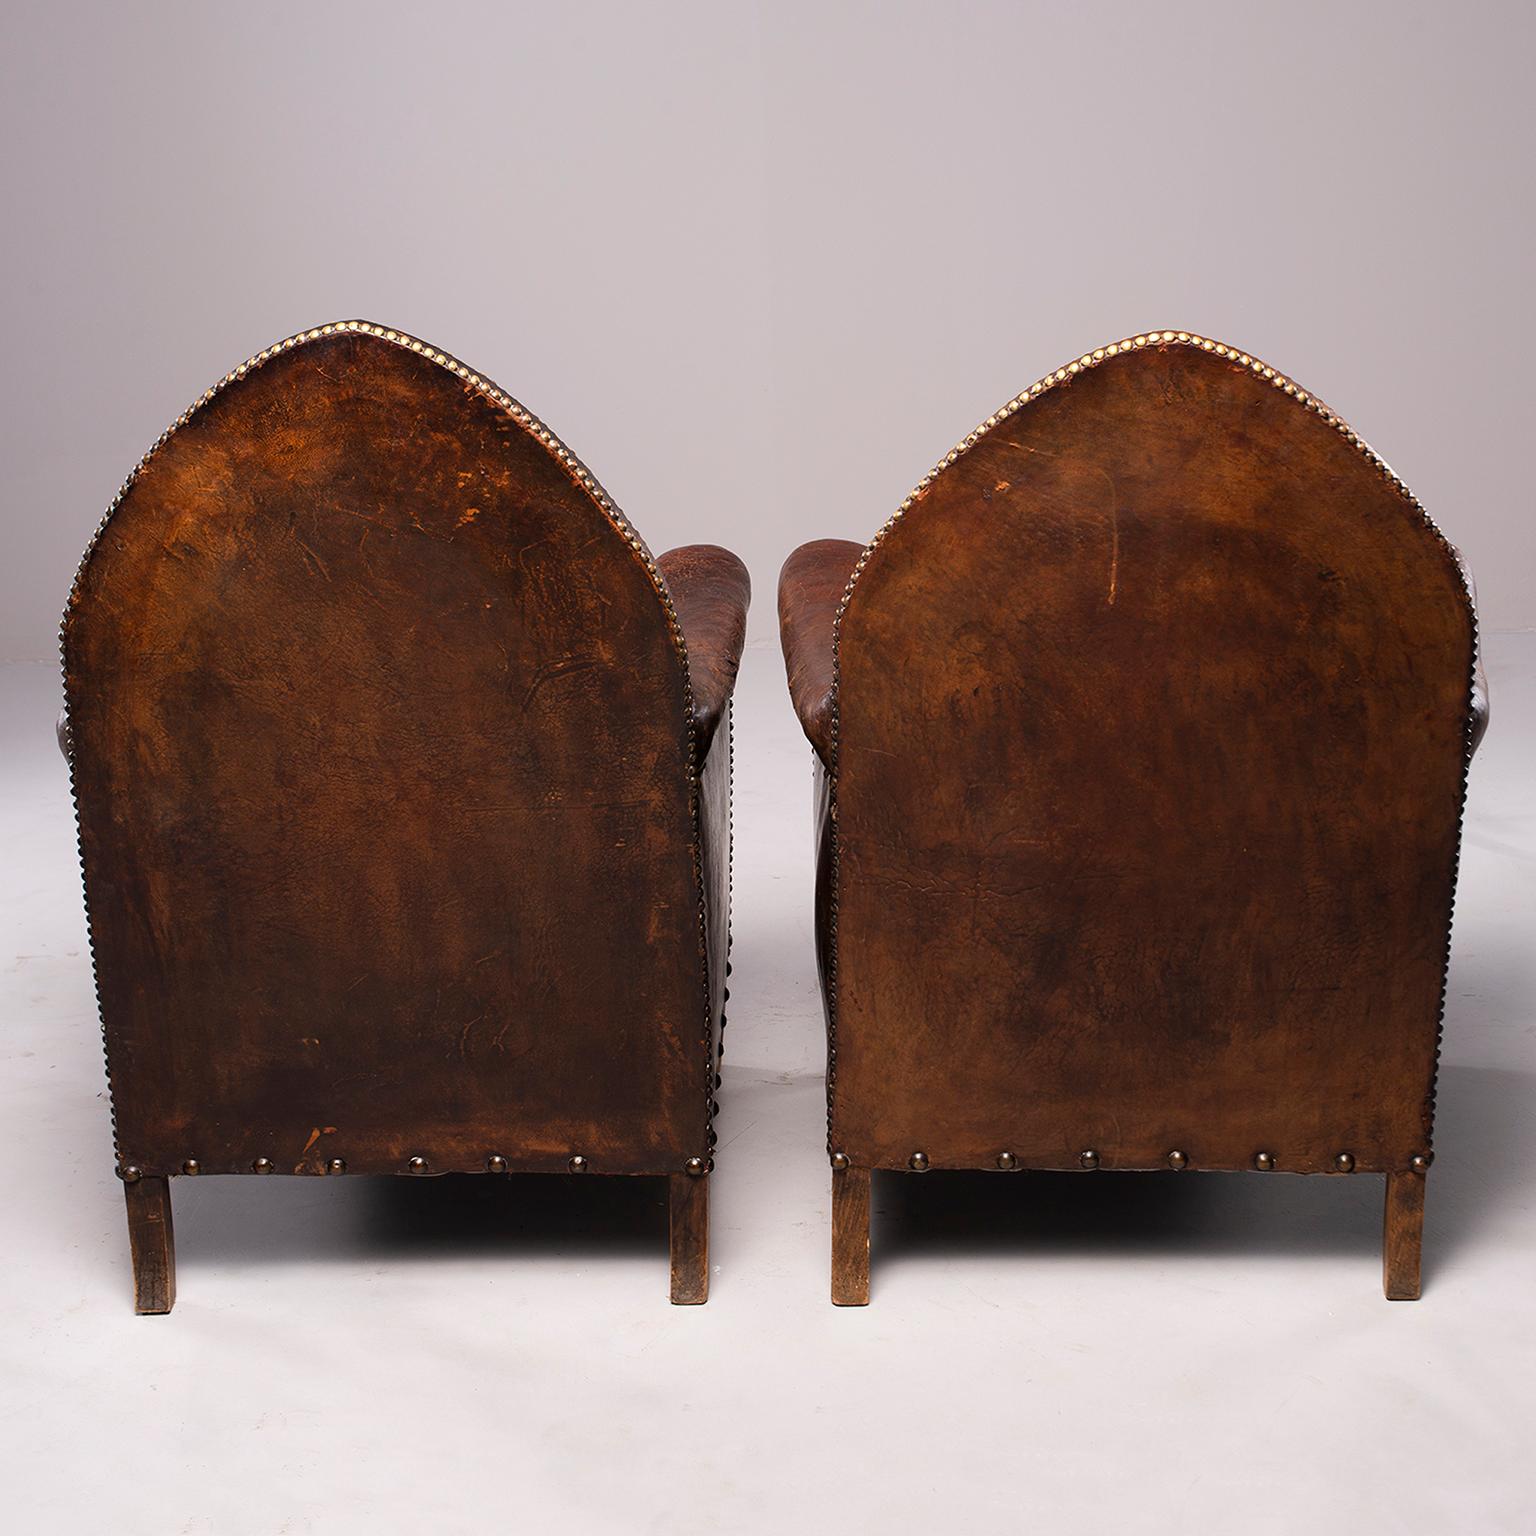 20th Century Pair of Dark Leather French Art Deco Club Chairs in Original Condition